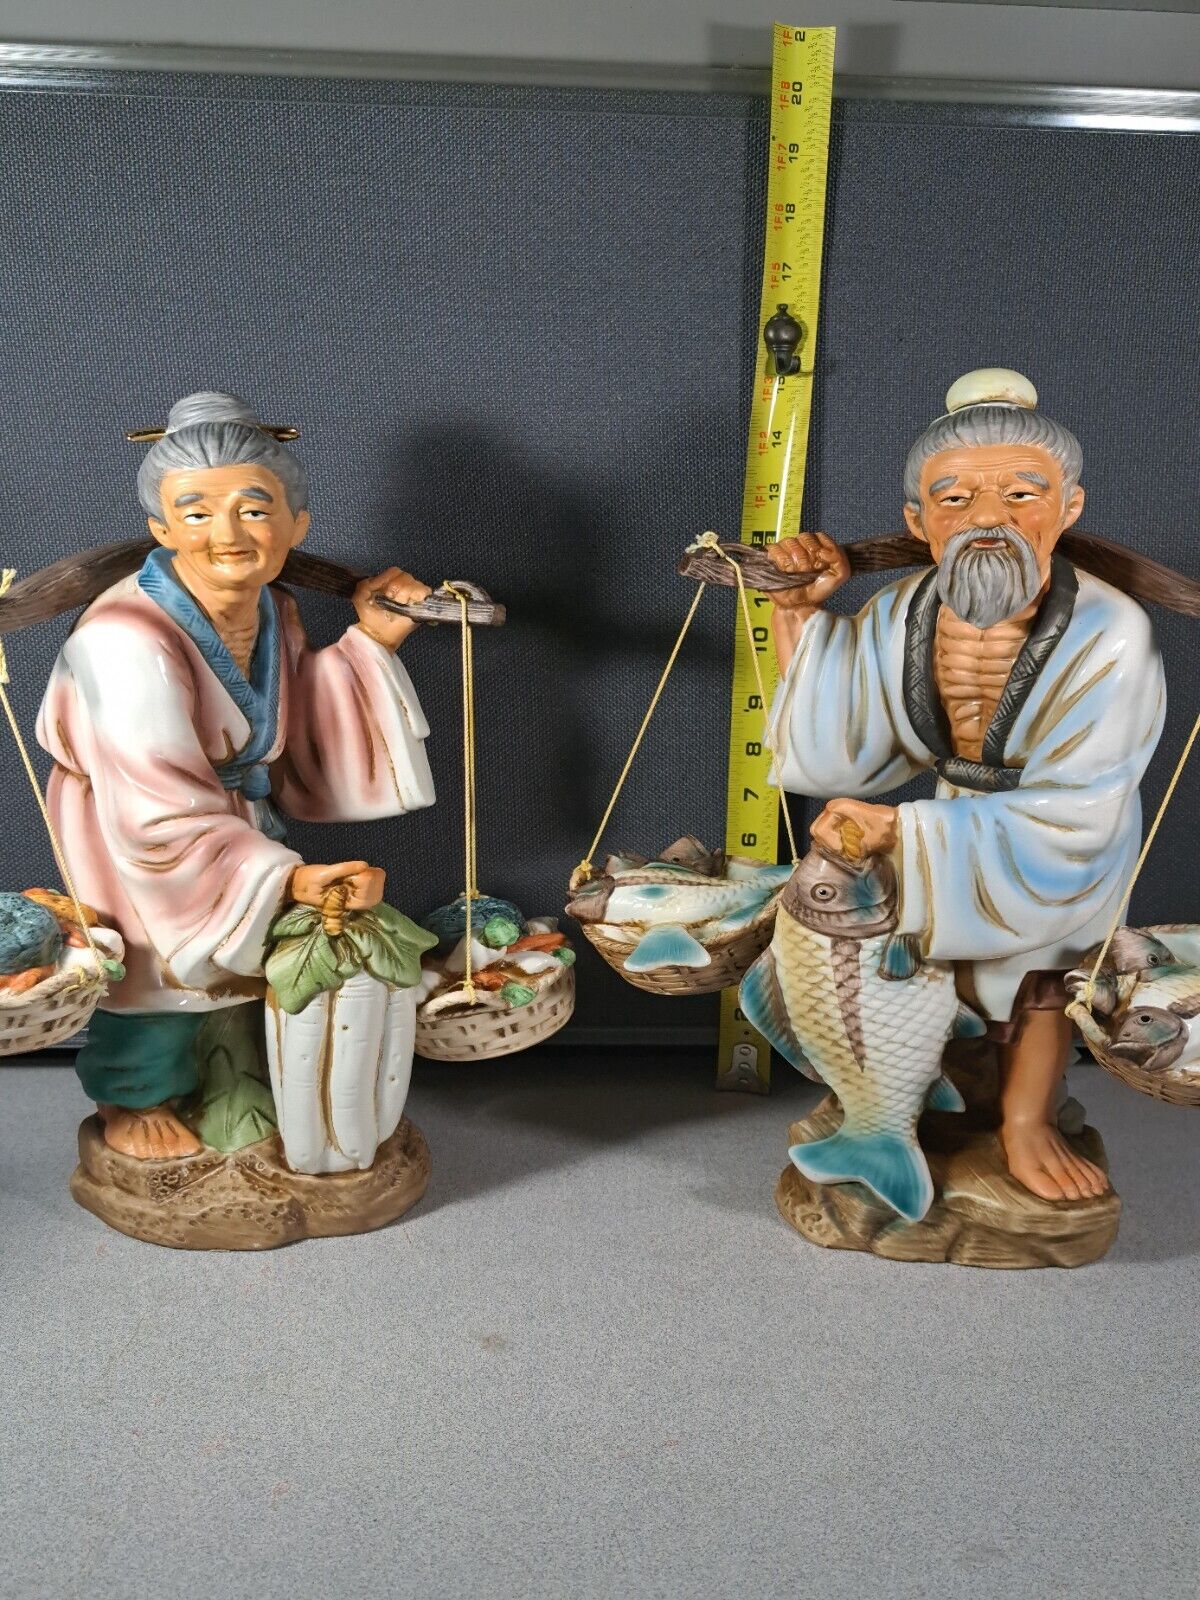 Antique Ceramic Yamakuni Statues Fisherman & Lady Handcrafted Japan #2693Hutch